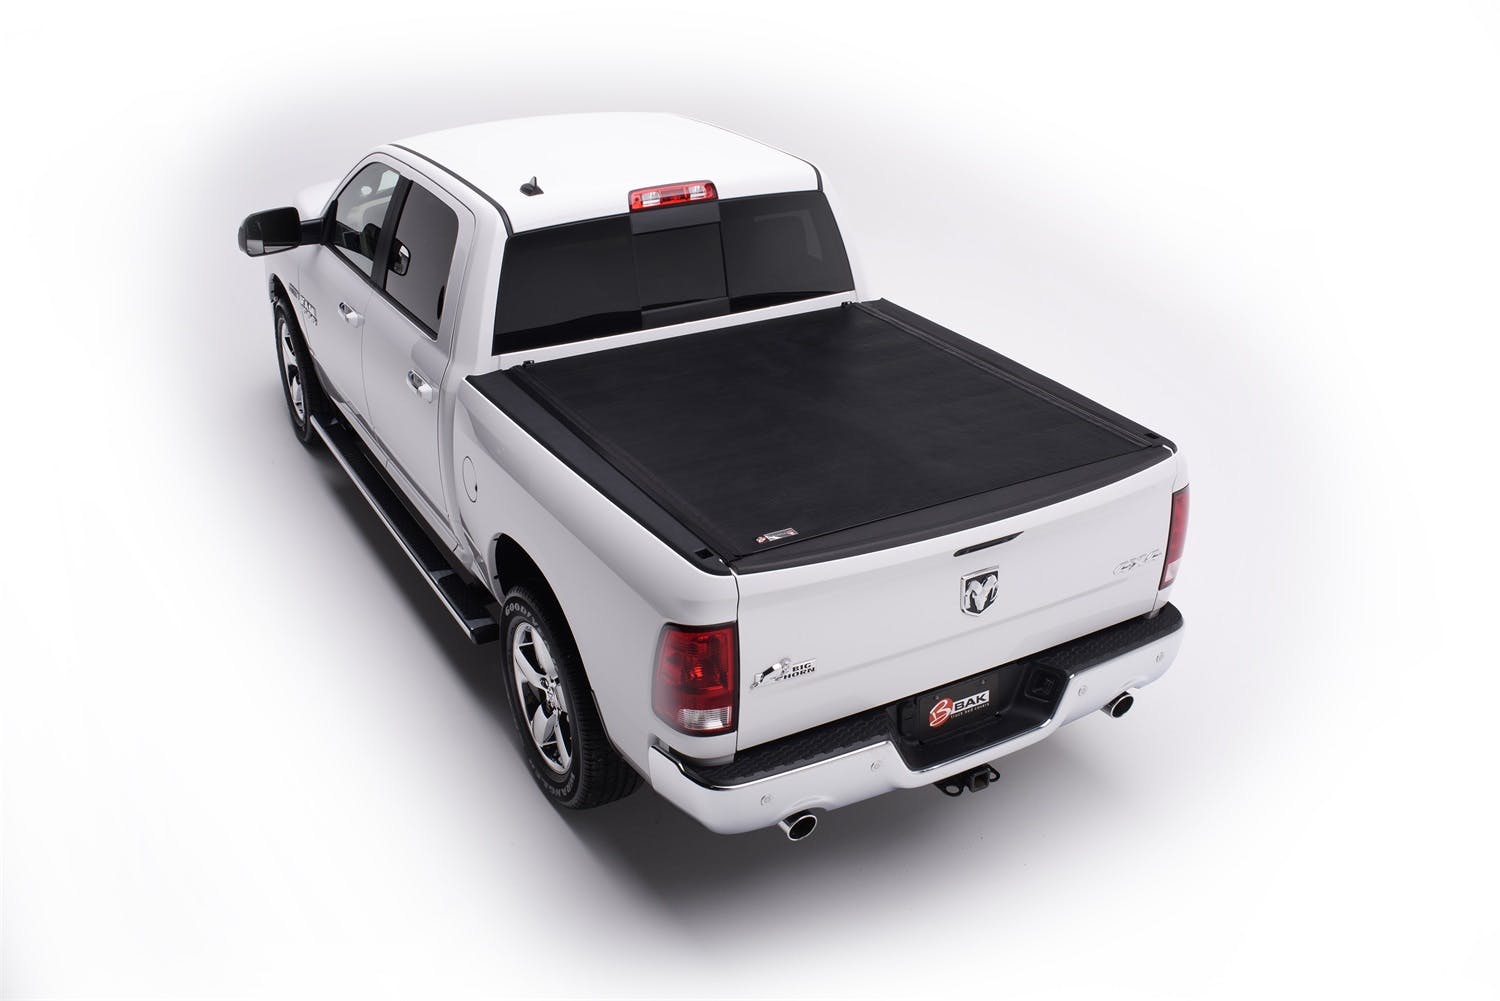 BAK Industries 39203 Revolver X2 Hard Rolling Truck Bed Cover